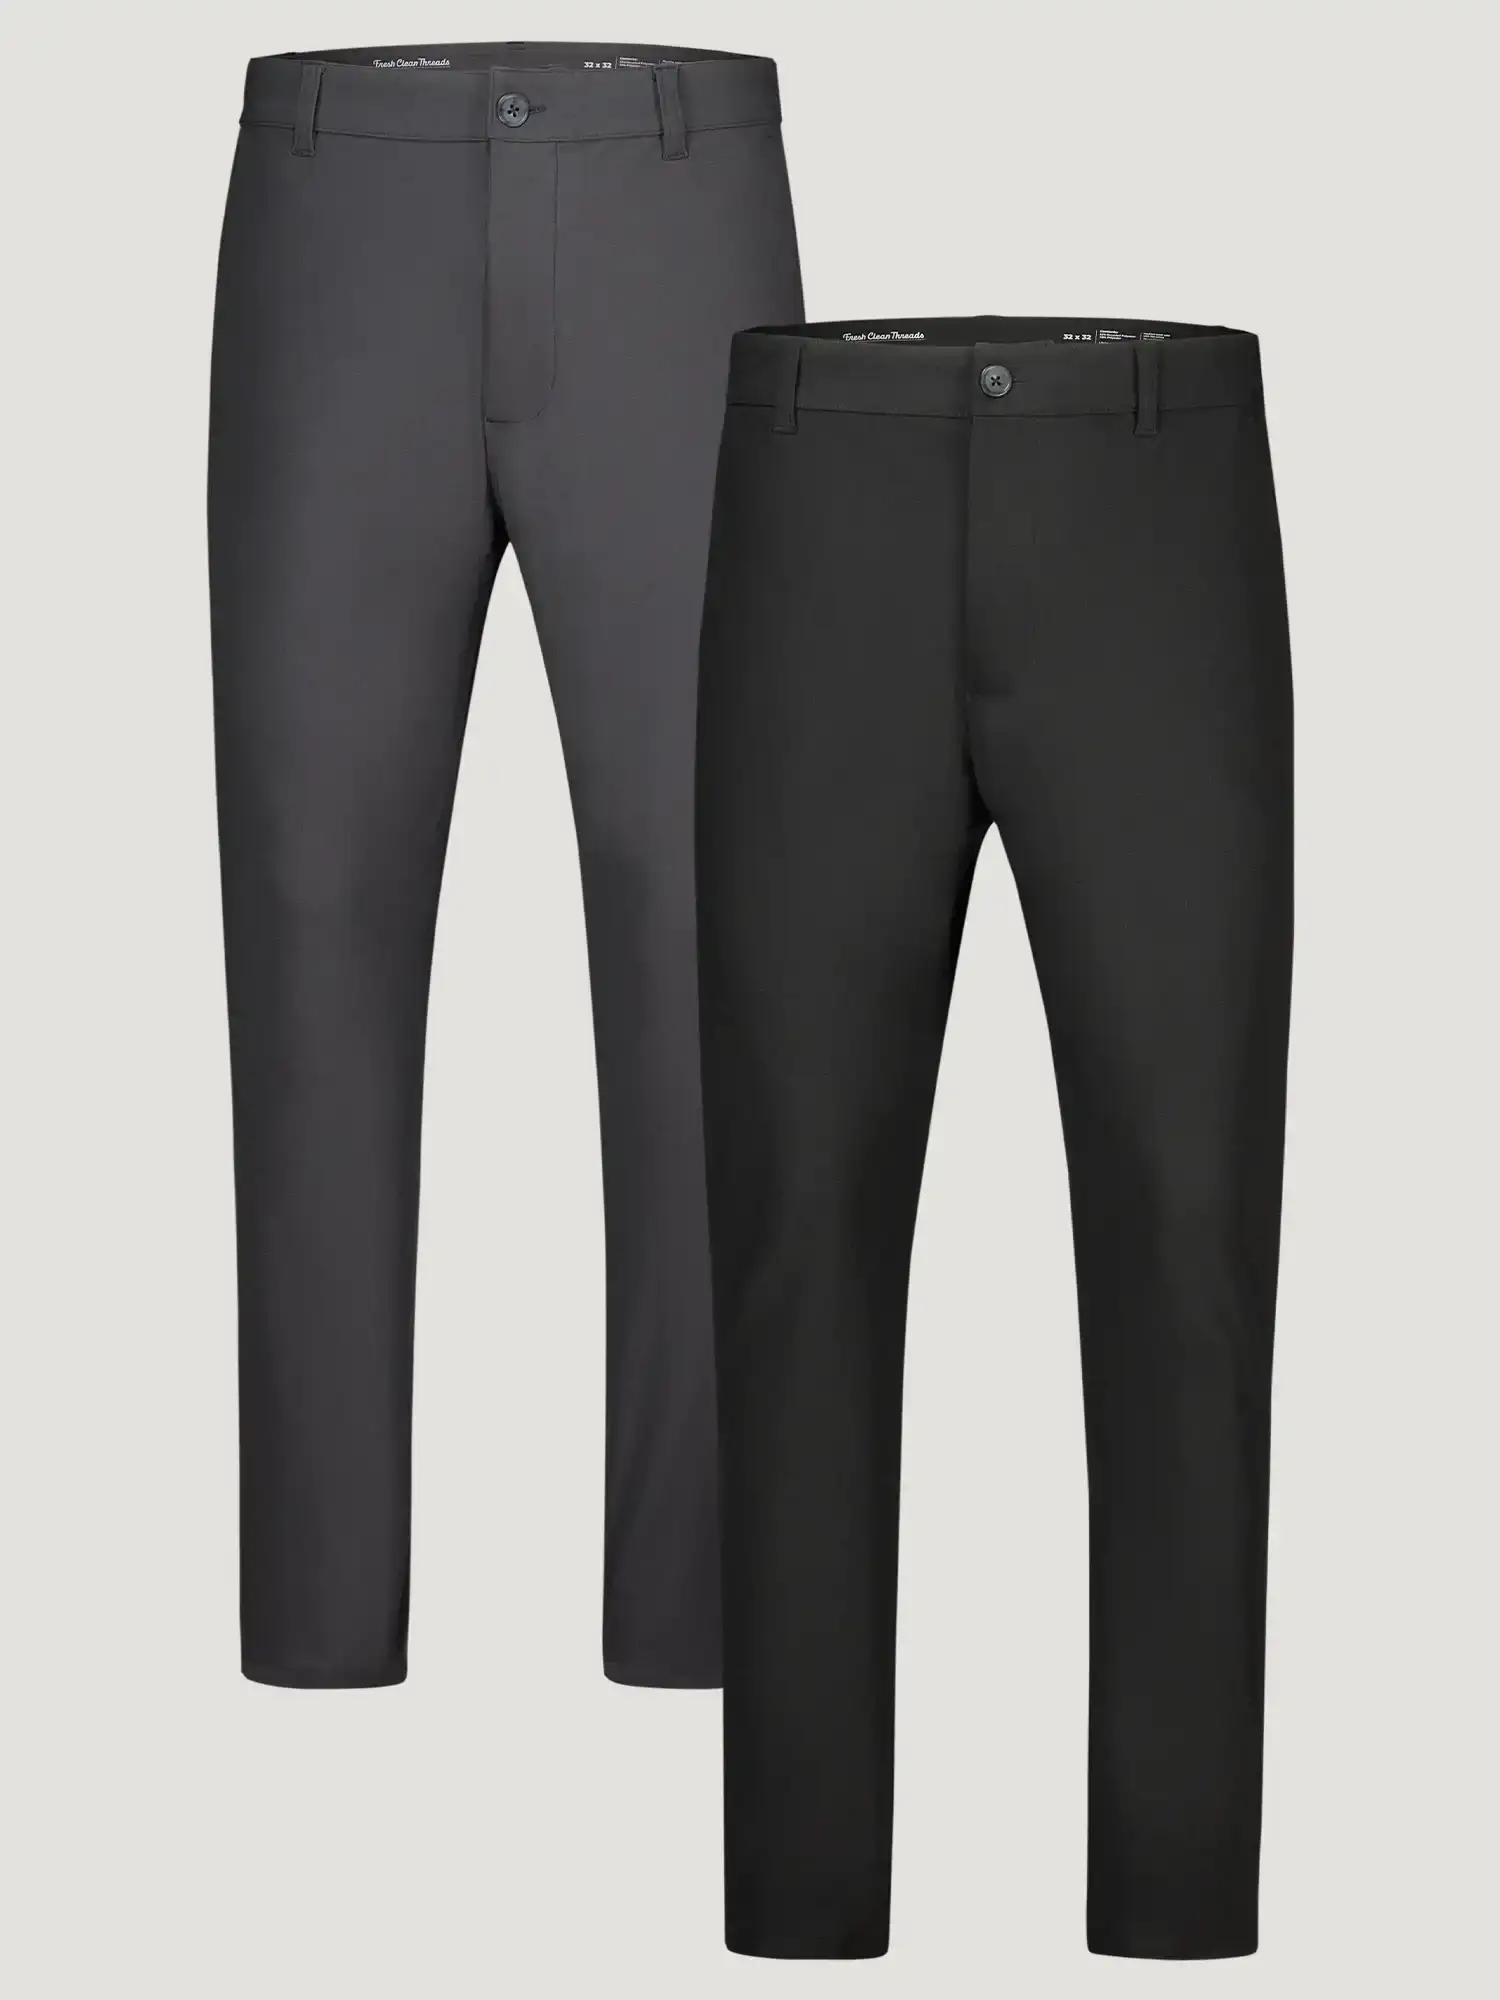 Image of Stretch Tech Pant Monochrome 2-Pack